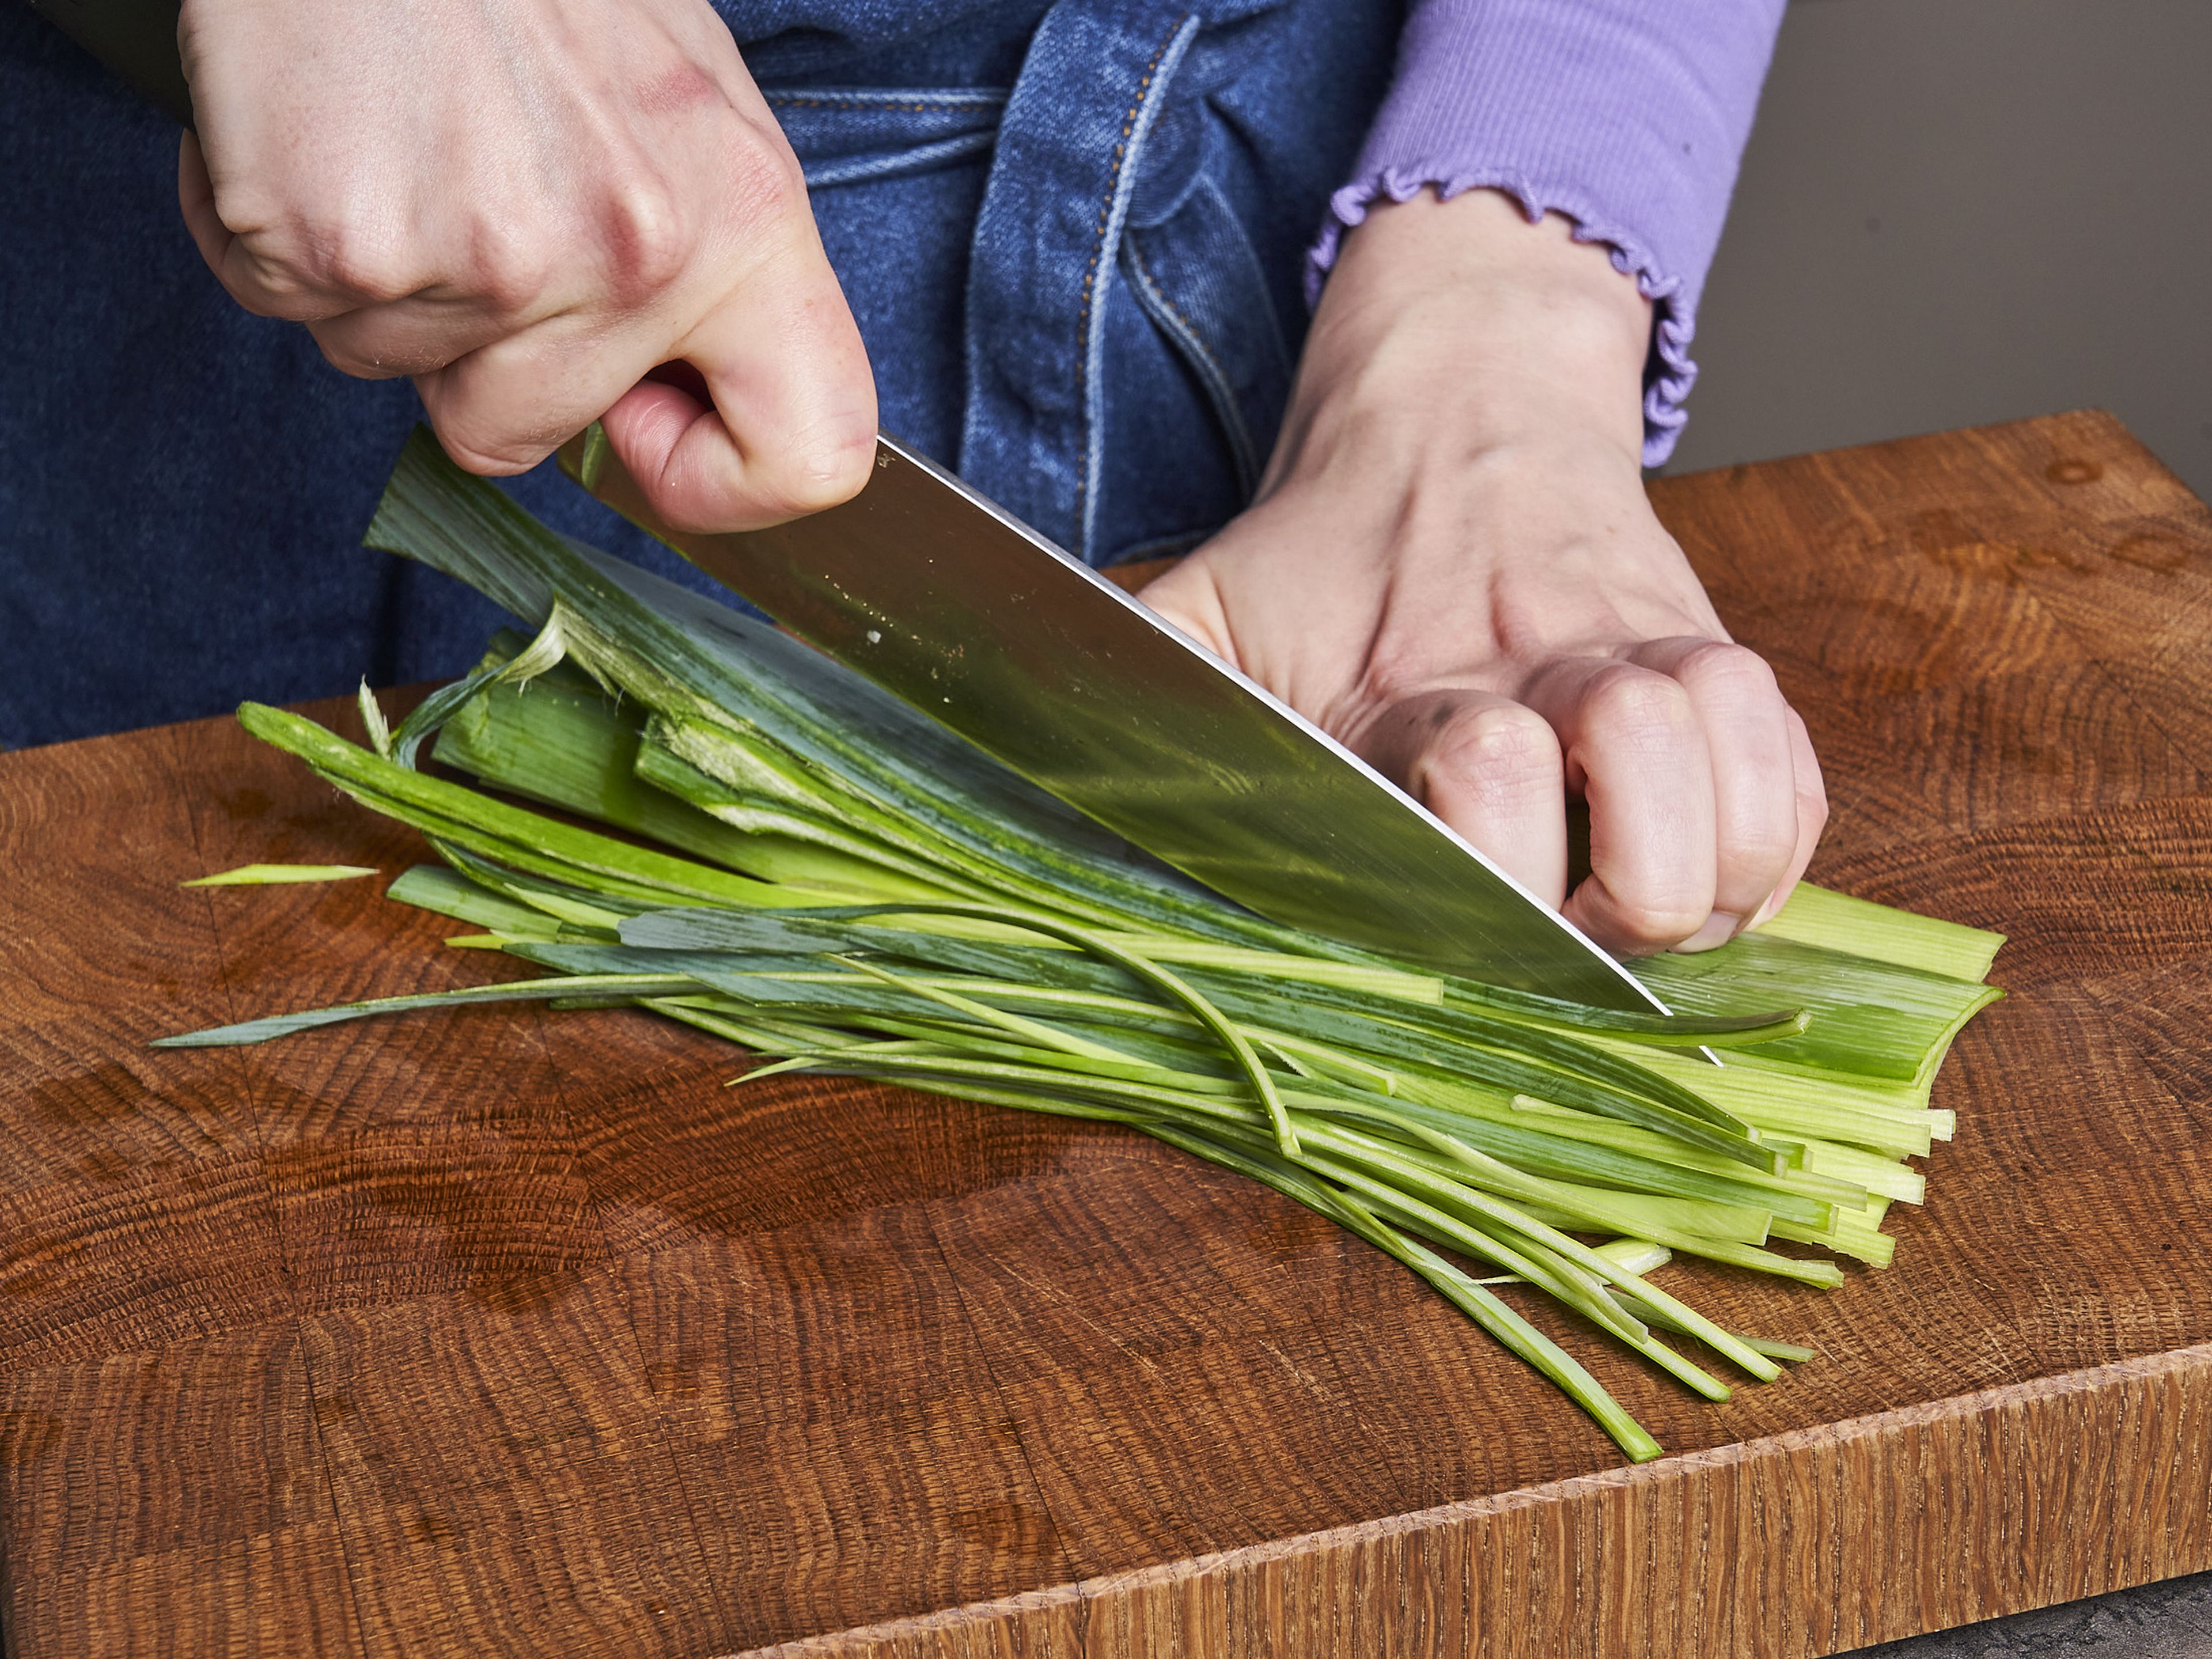 Separate the white and the green of the leek. Halve the whites lengthwise, wash well, and slice thinly. Wash the greens as well, stack them, and cut into thin, long, spaghetti like strips. Prepare a pot of water for pasta and set to boil. Grate the parmesan.